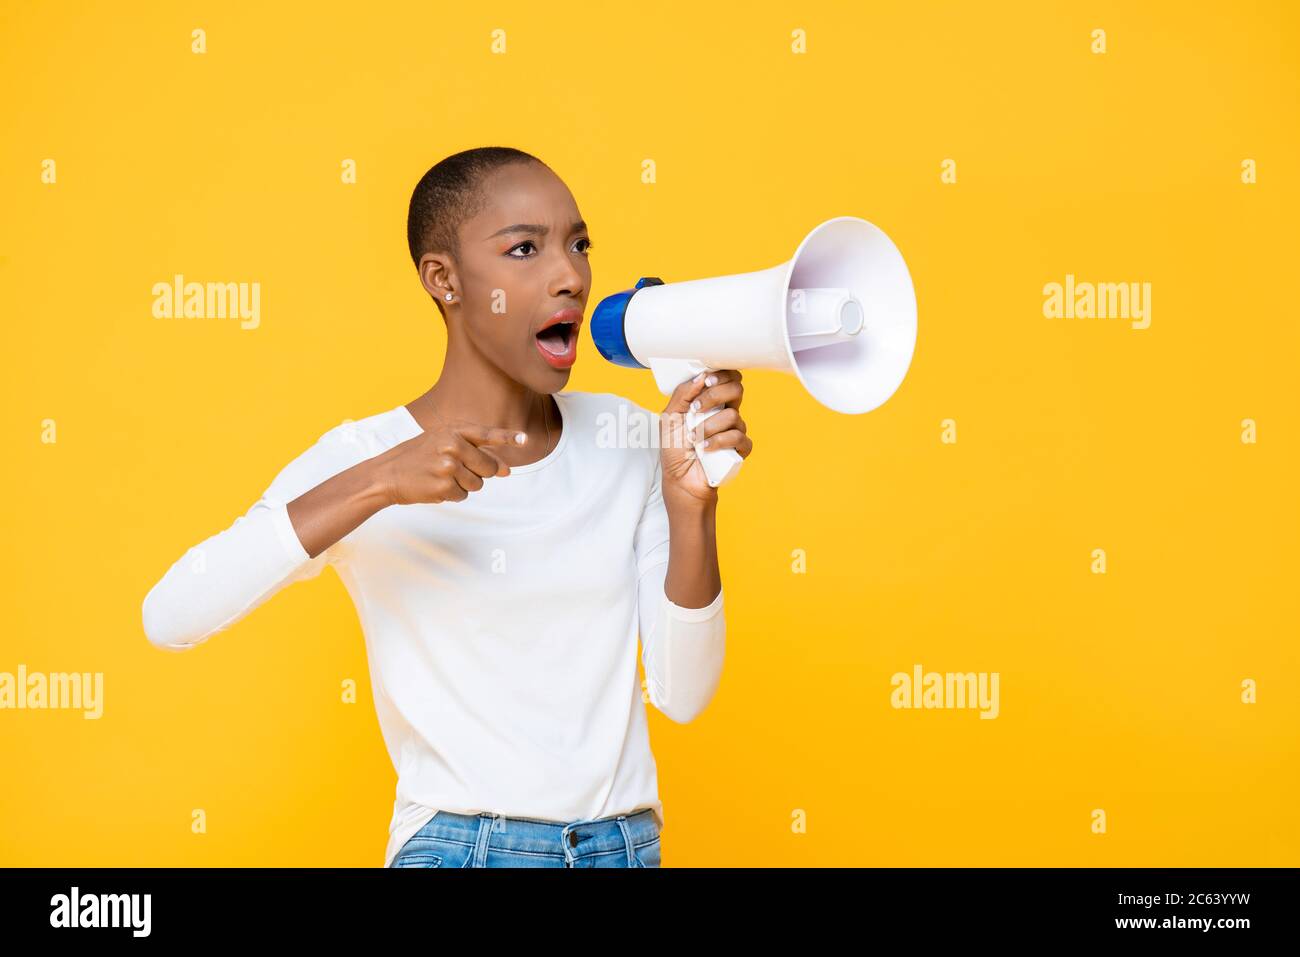 African American woman shouting on megaphone and pointing hand isolated on yellow background Stock Photo